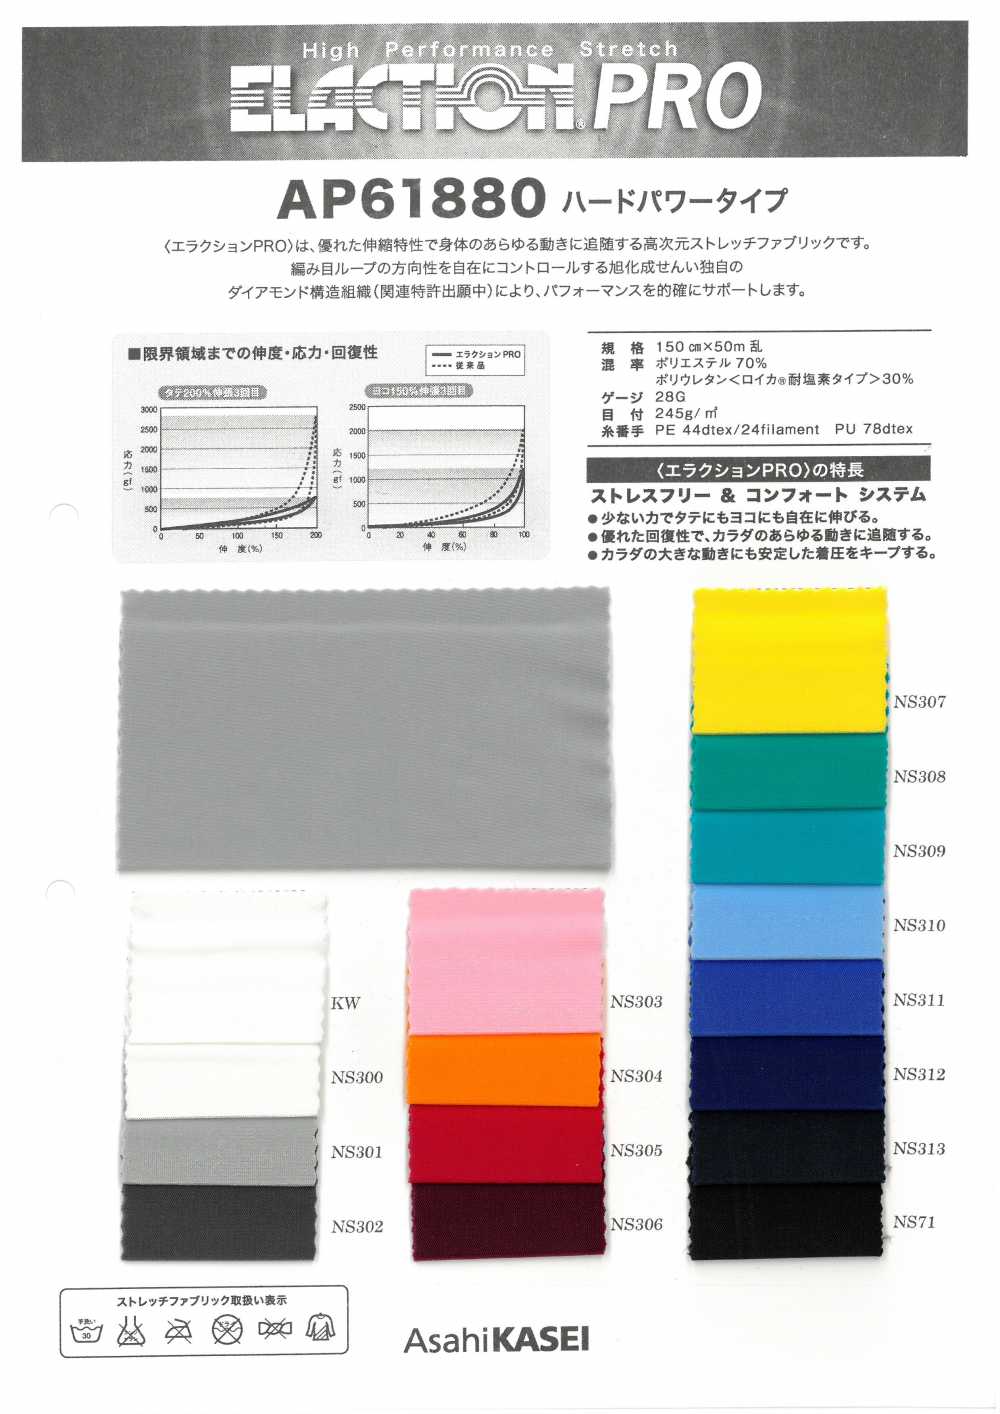 AP61880 High Power Power Type[Textile / Fabric] Japan Stretch